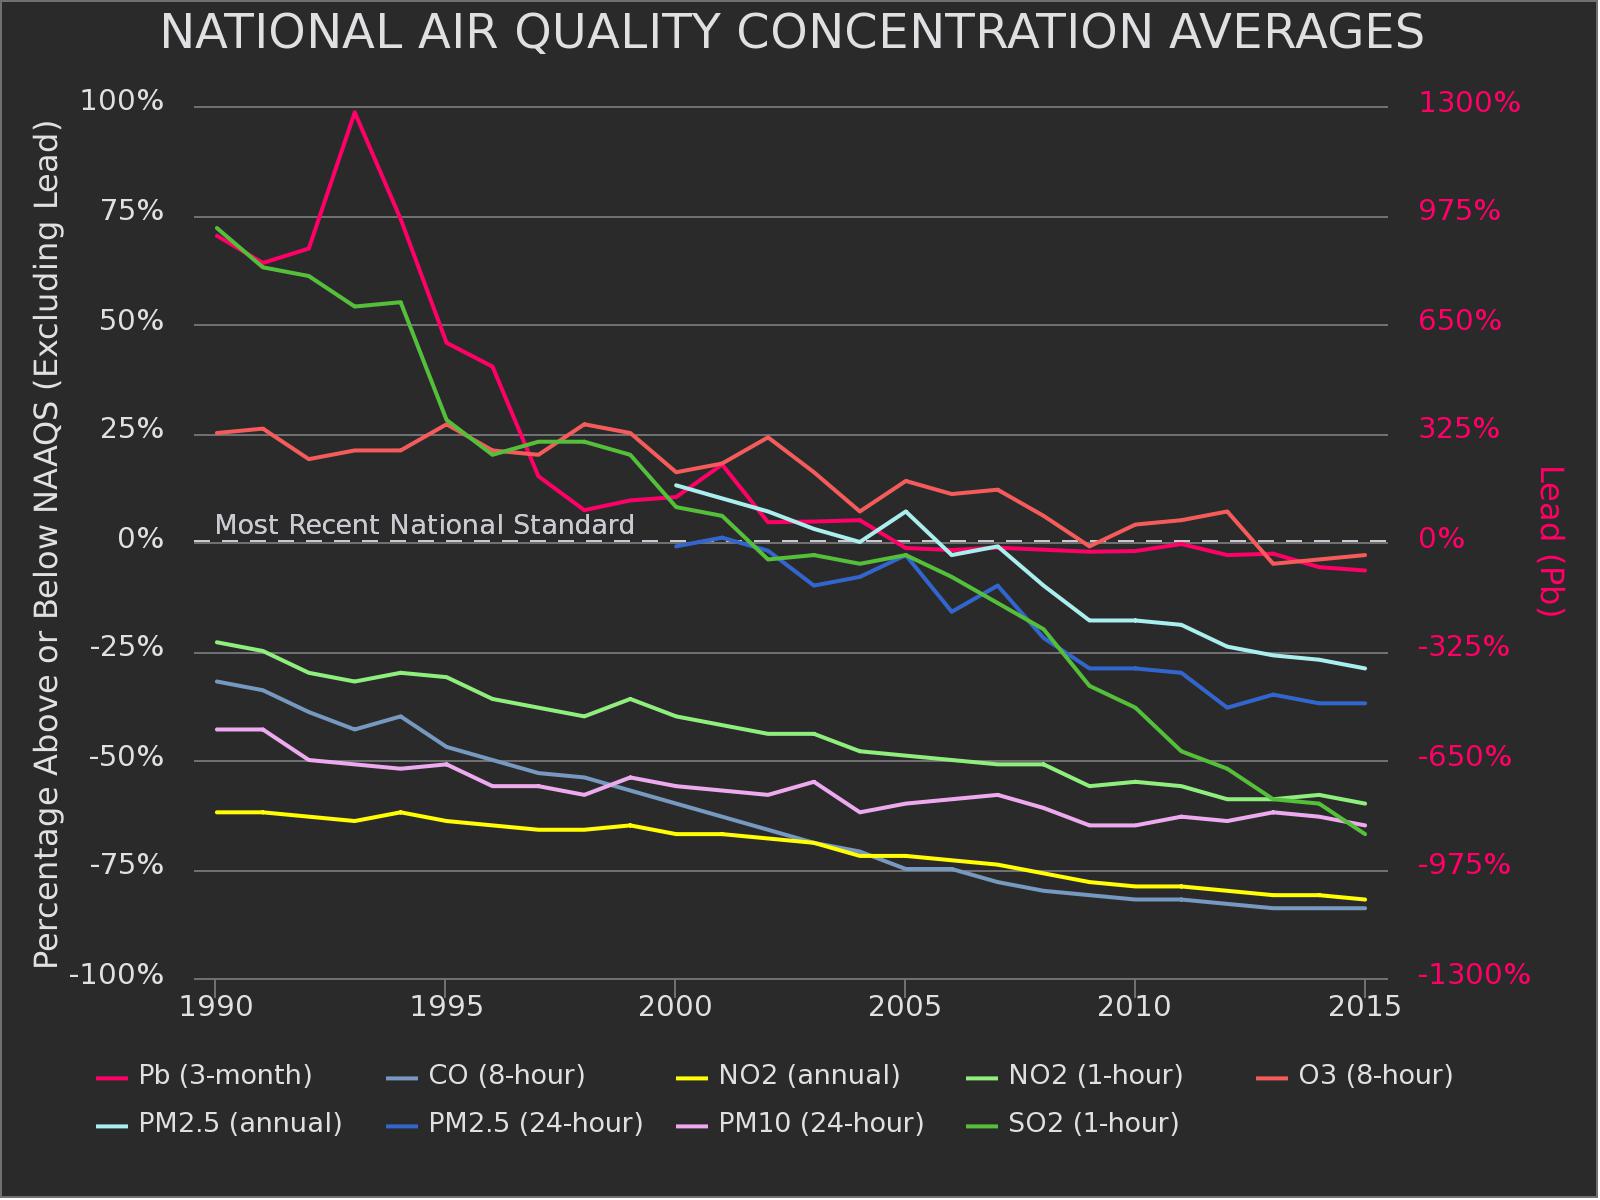 US air quality trends 1990-2015